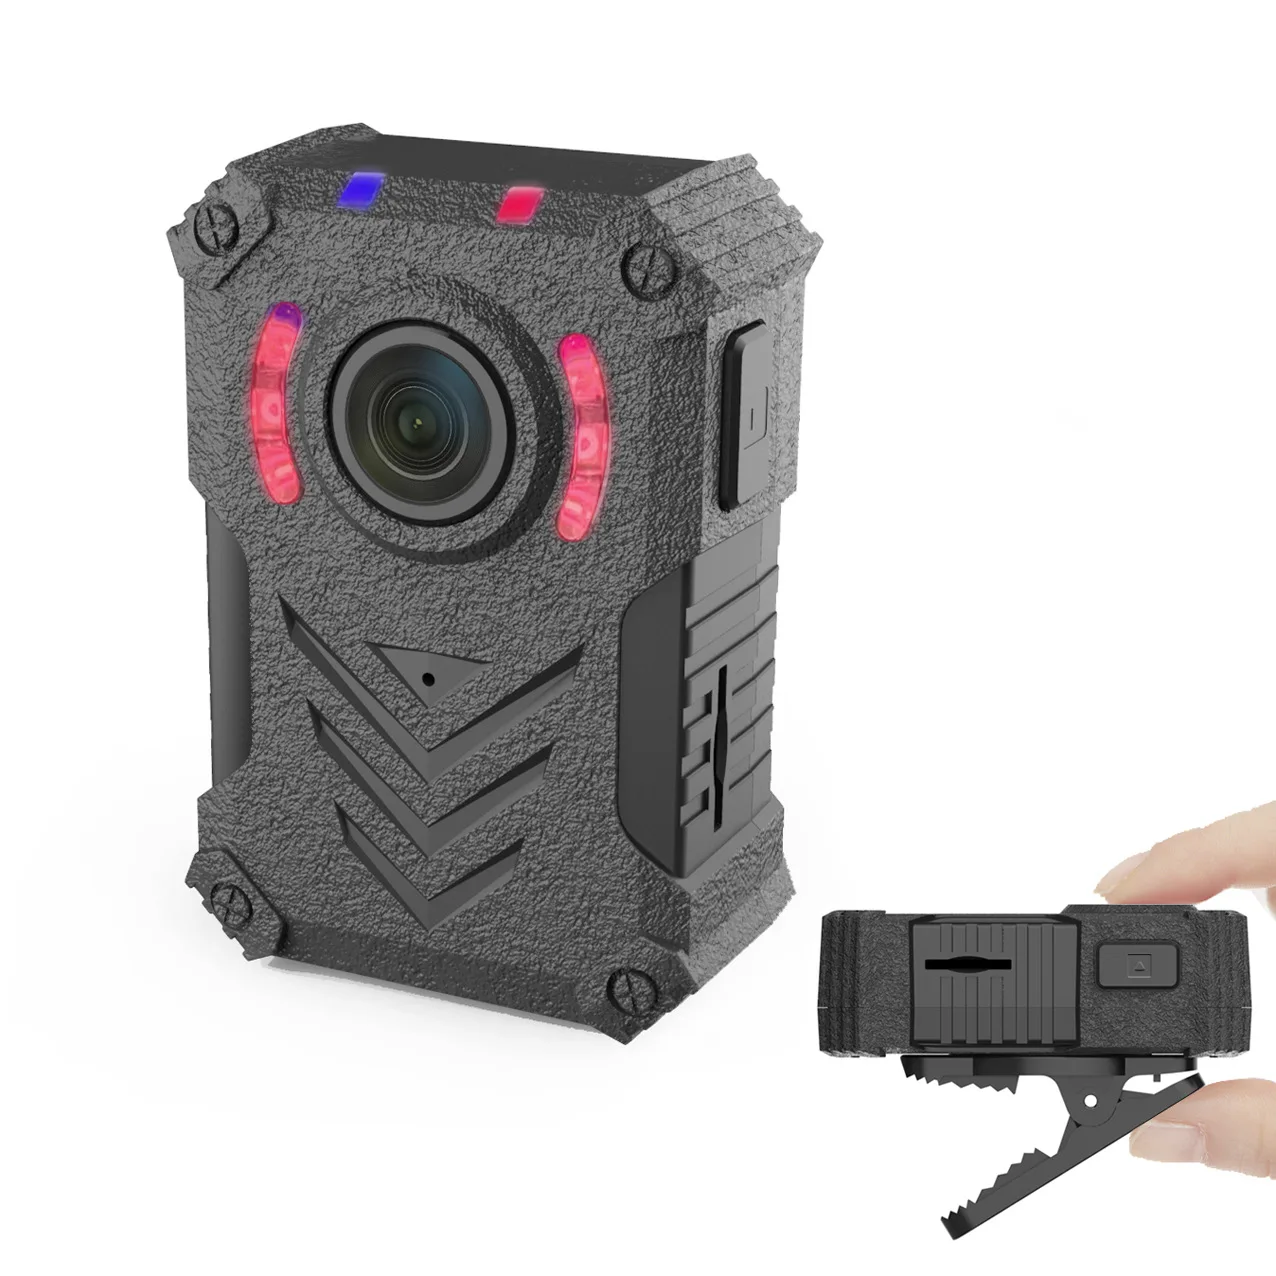 

Mini Camera Infrared night Vision HD 1080P Lens Bike/Hiking/Dash Cam Small Camcorder 140 Degrees Viewing Police Pocket Bodycam